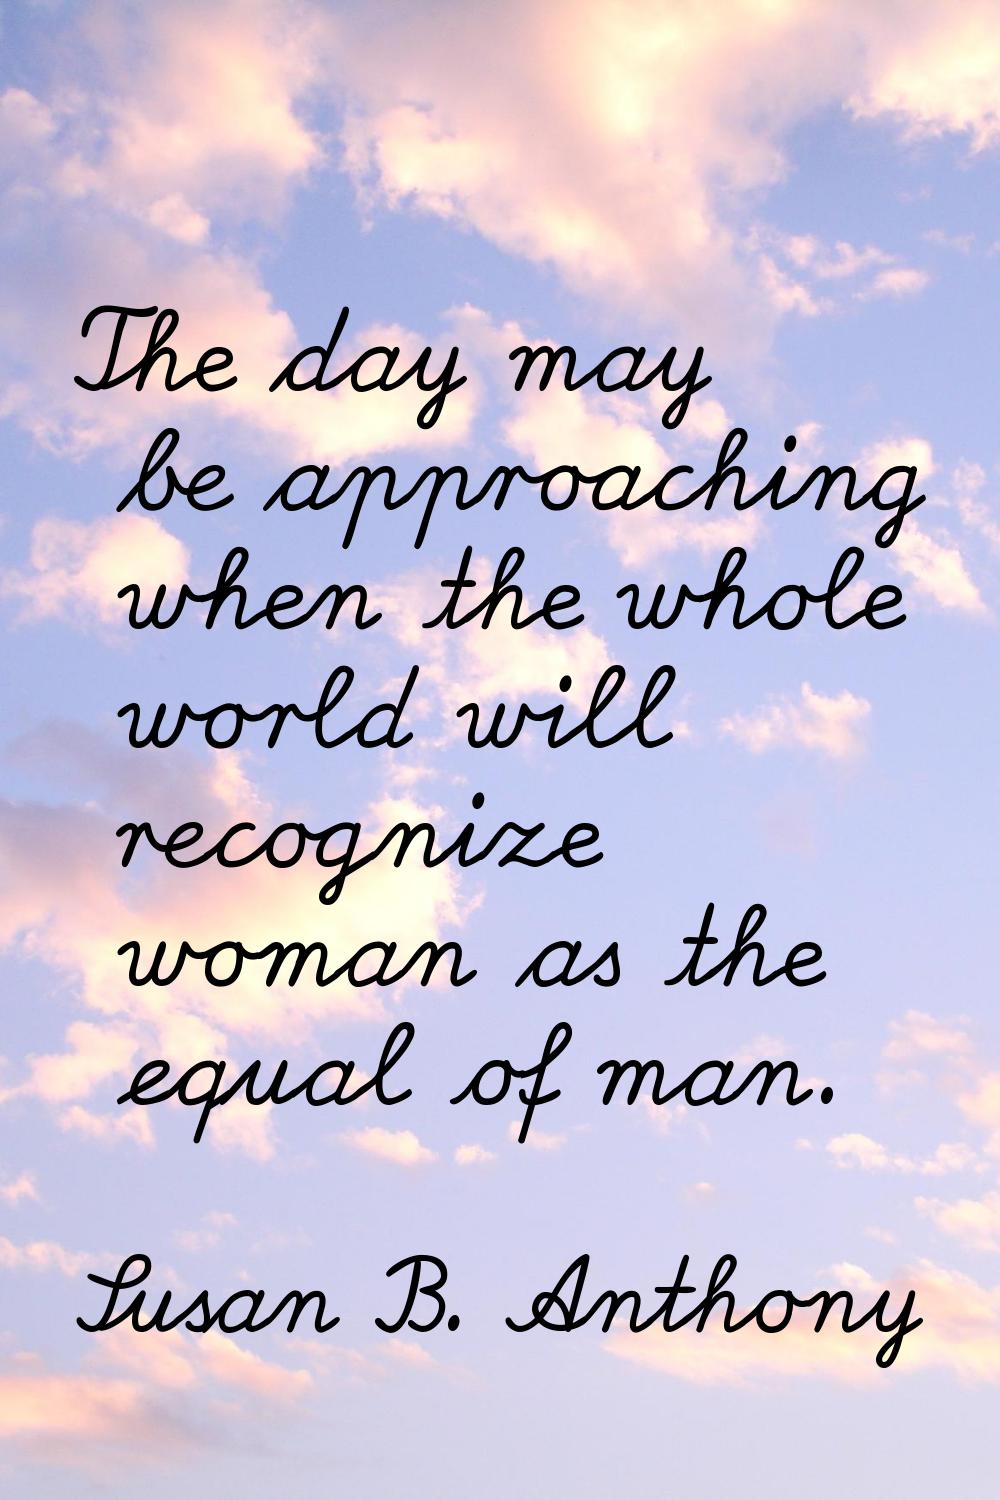 The day may be approaching when the whole world will recognize woman as the equal of man.